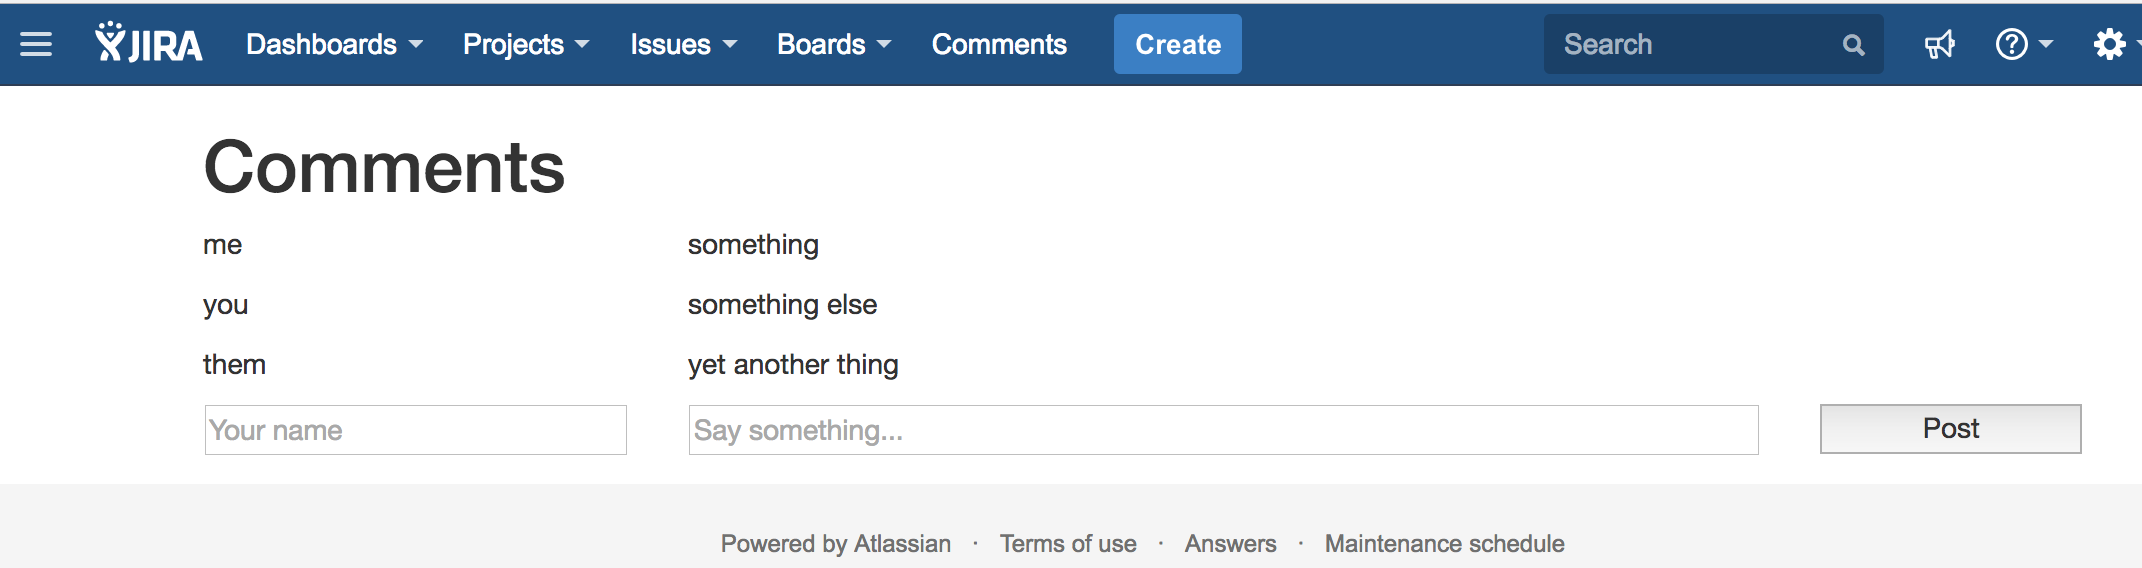 New page in JIRA